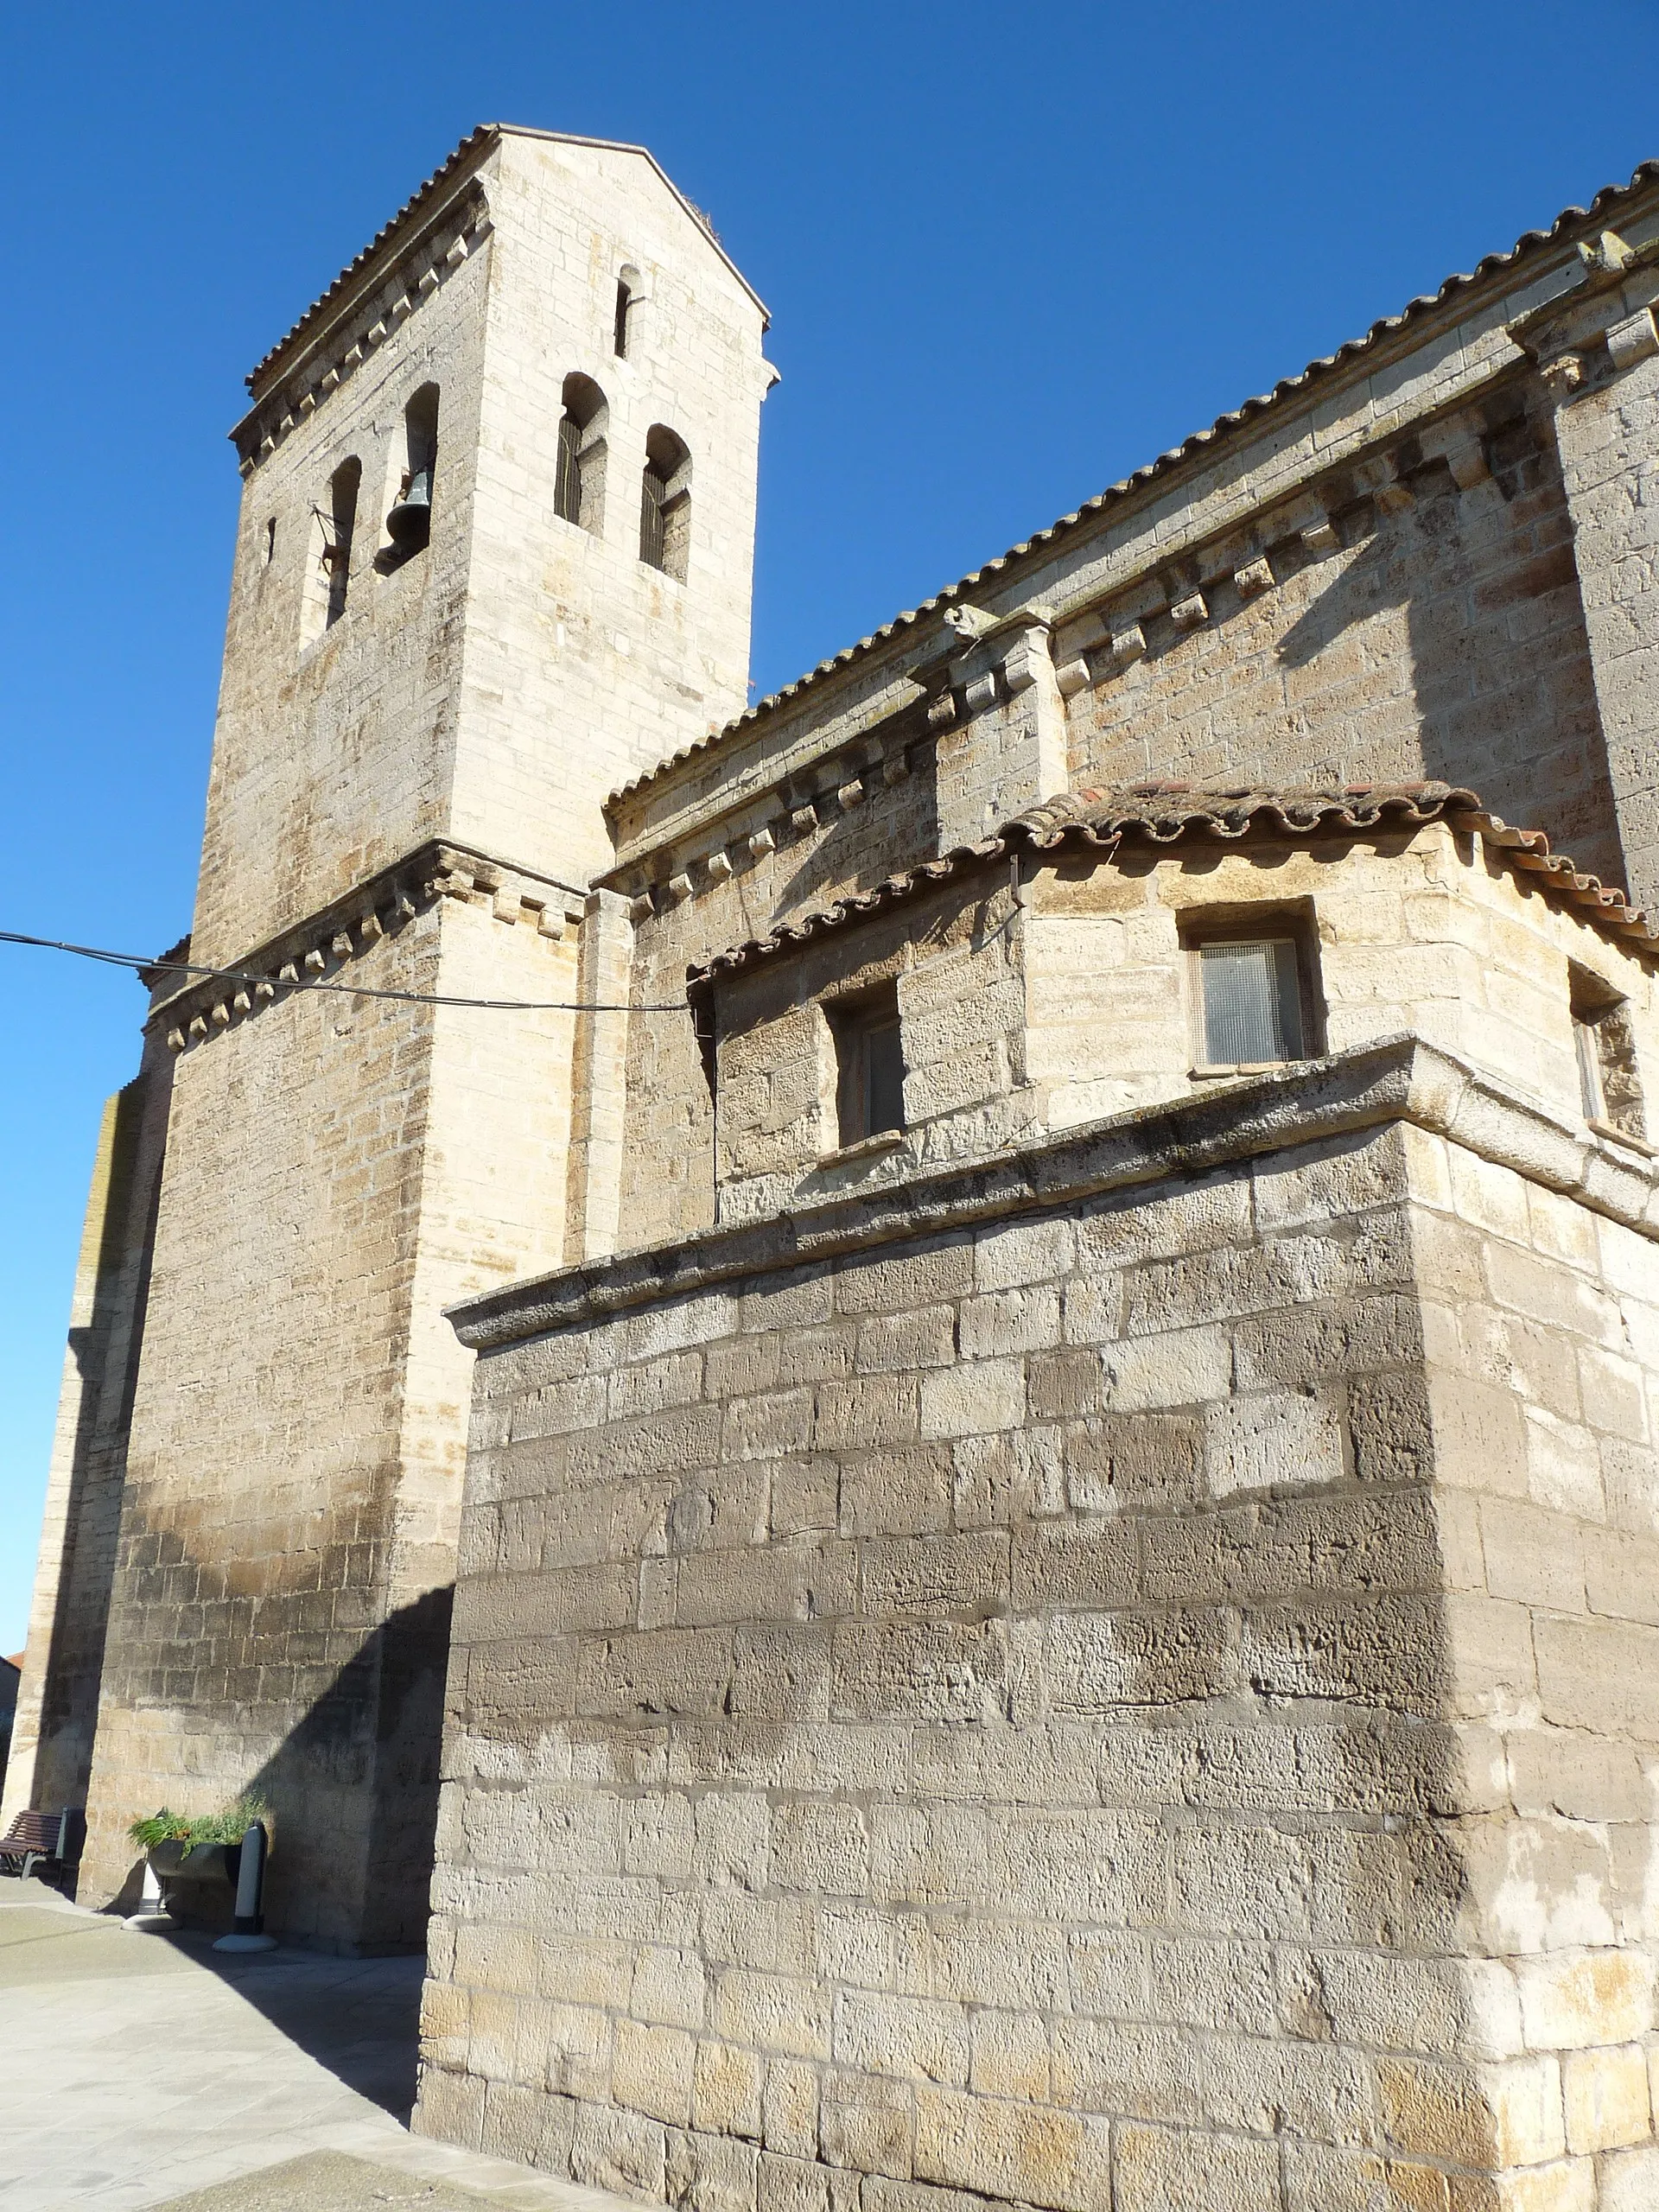 Photo showing: Ontiñena - Iglesia de Santa María la Mayor (s. XIII)

This is a photo of a monument indexed in the Spanish heritage register of Bienes de Interés Cultural under the reference 1-INM-HUE-011-165-003.